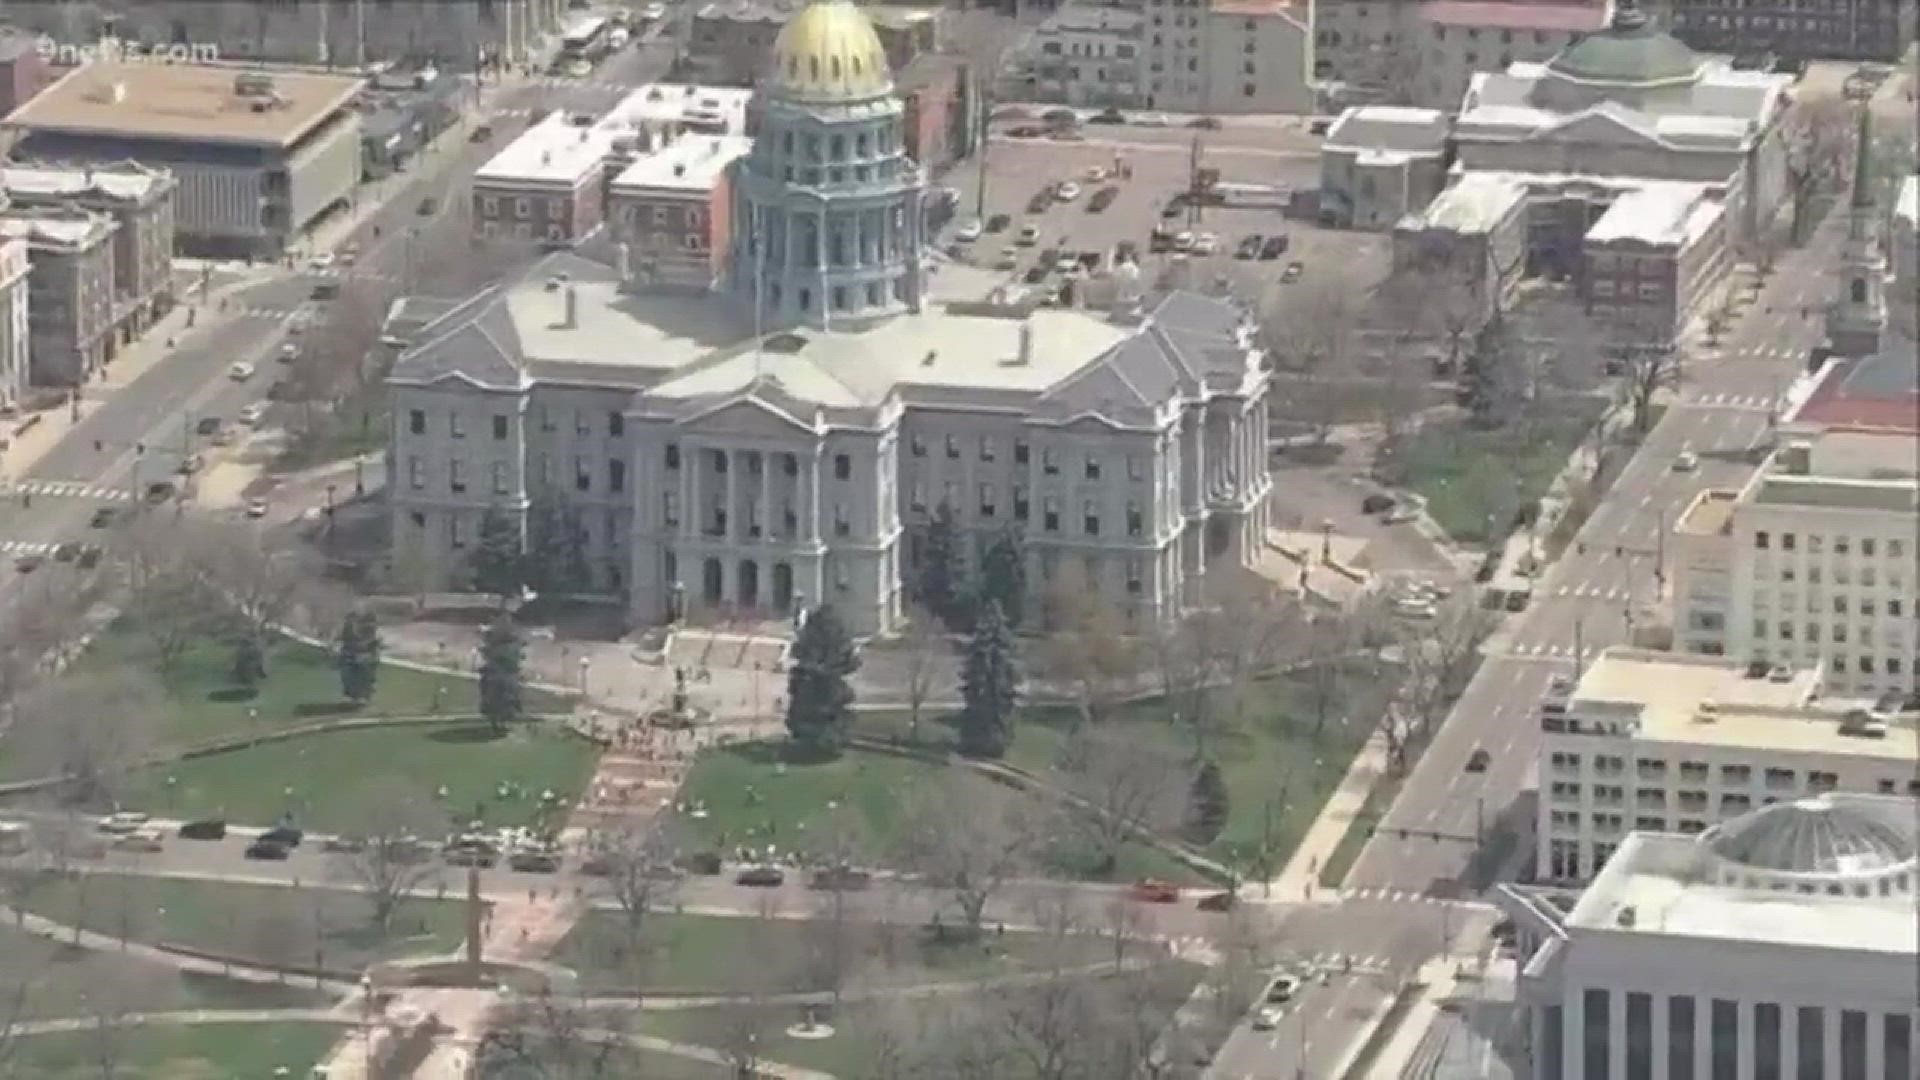 Groups protested Colorado's stay-at-home order outside the State Capitol in Denver on April 19.